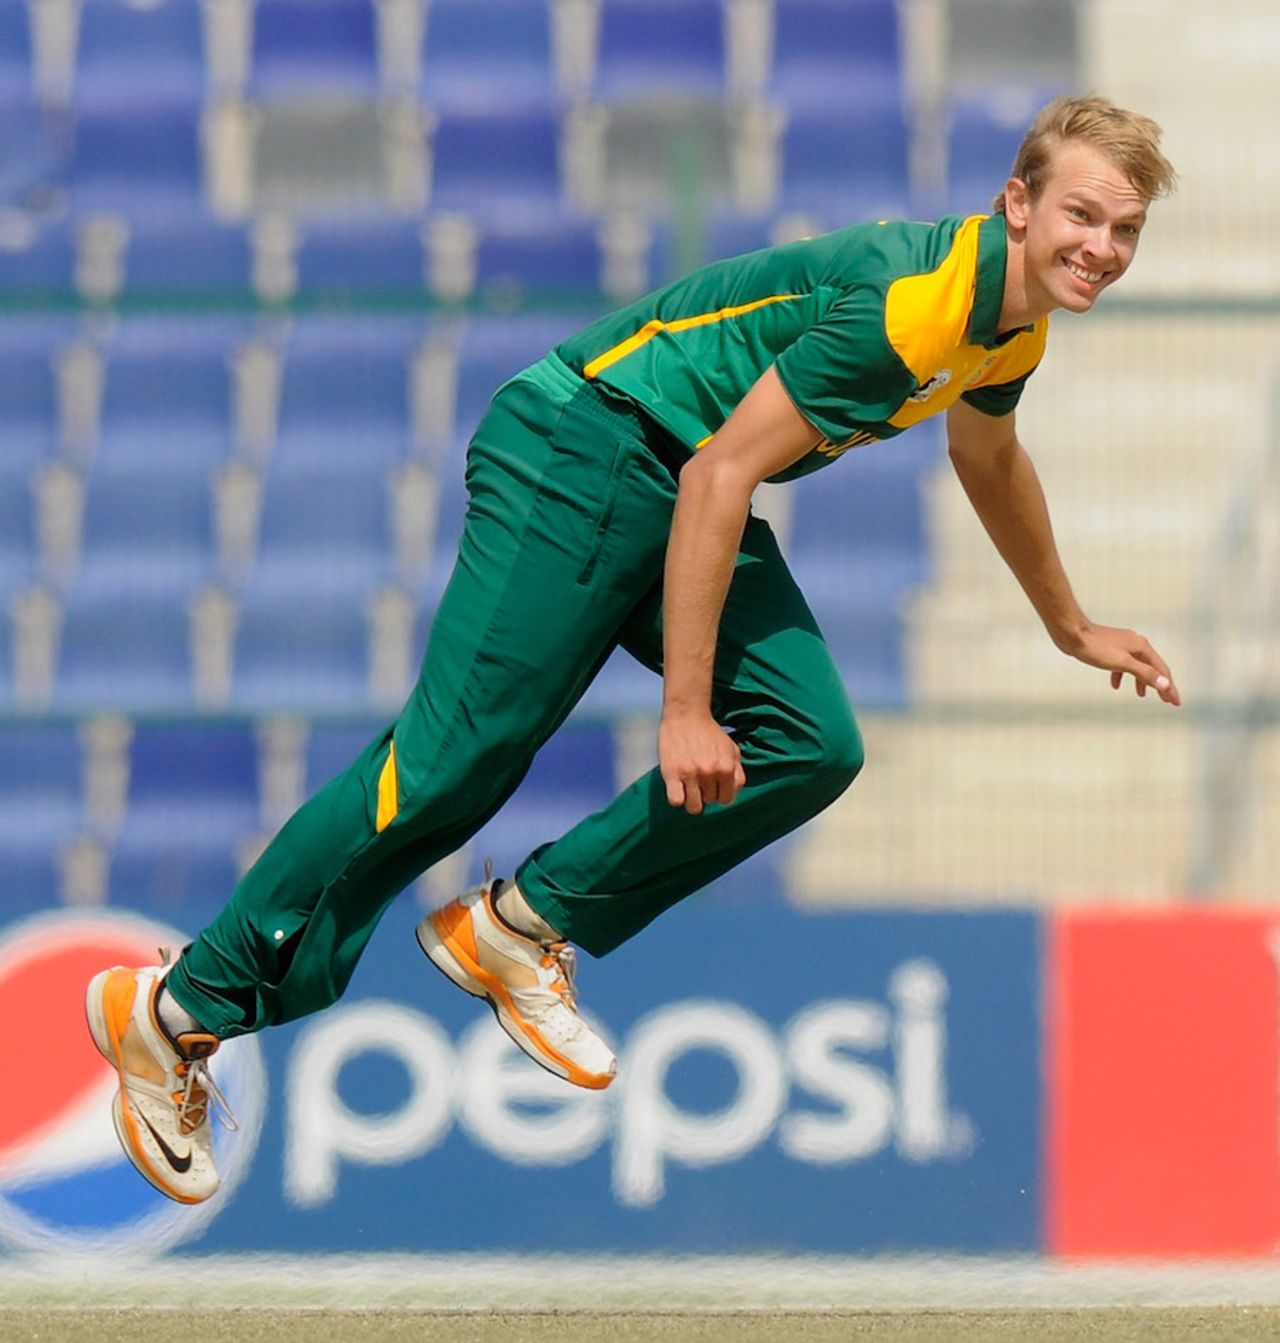 Justin Dill picked up four wickets in his spell, Zimbabwe Under-19s v South Africa Under-19s, Under-19 World Cup, Abu Dhabi, February 18, 2014